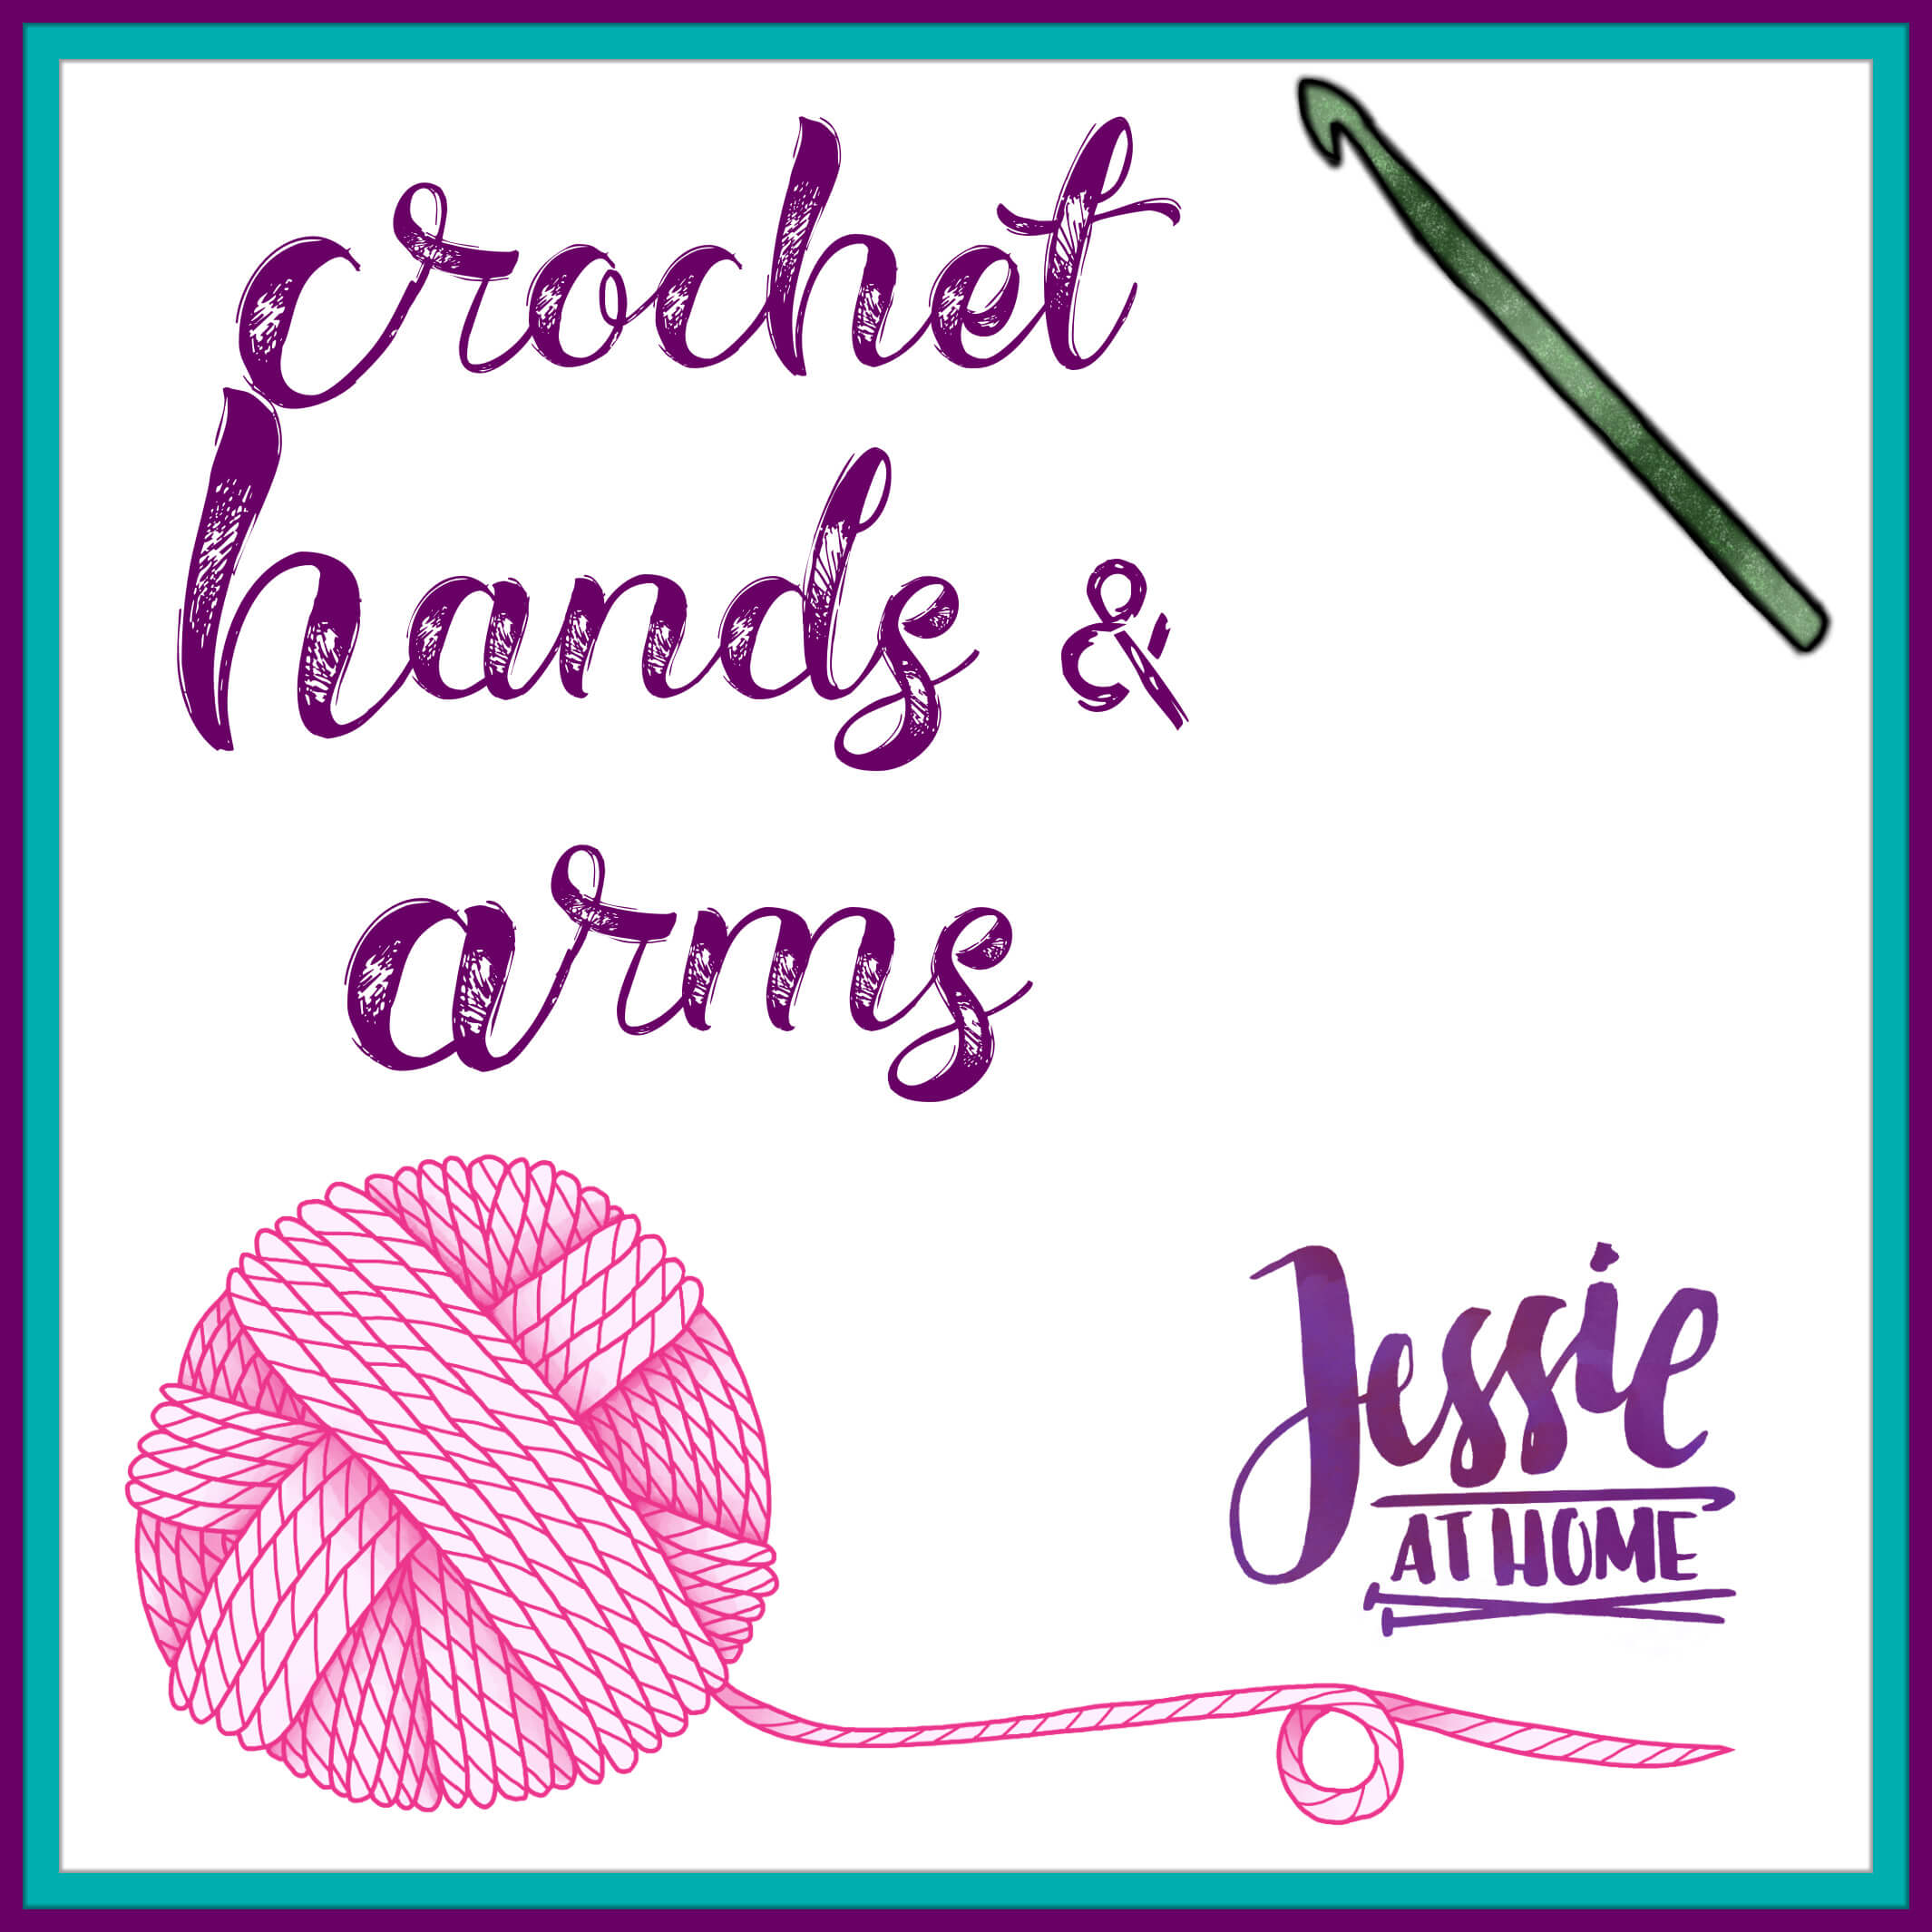 Crochet Hands & Arms Menu on Jessie At Home